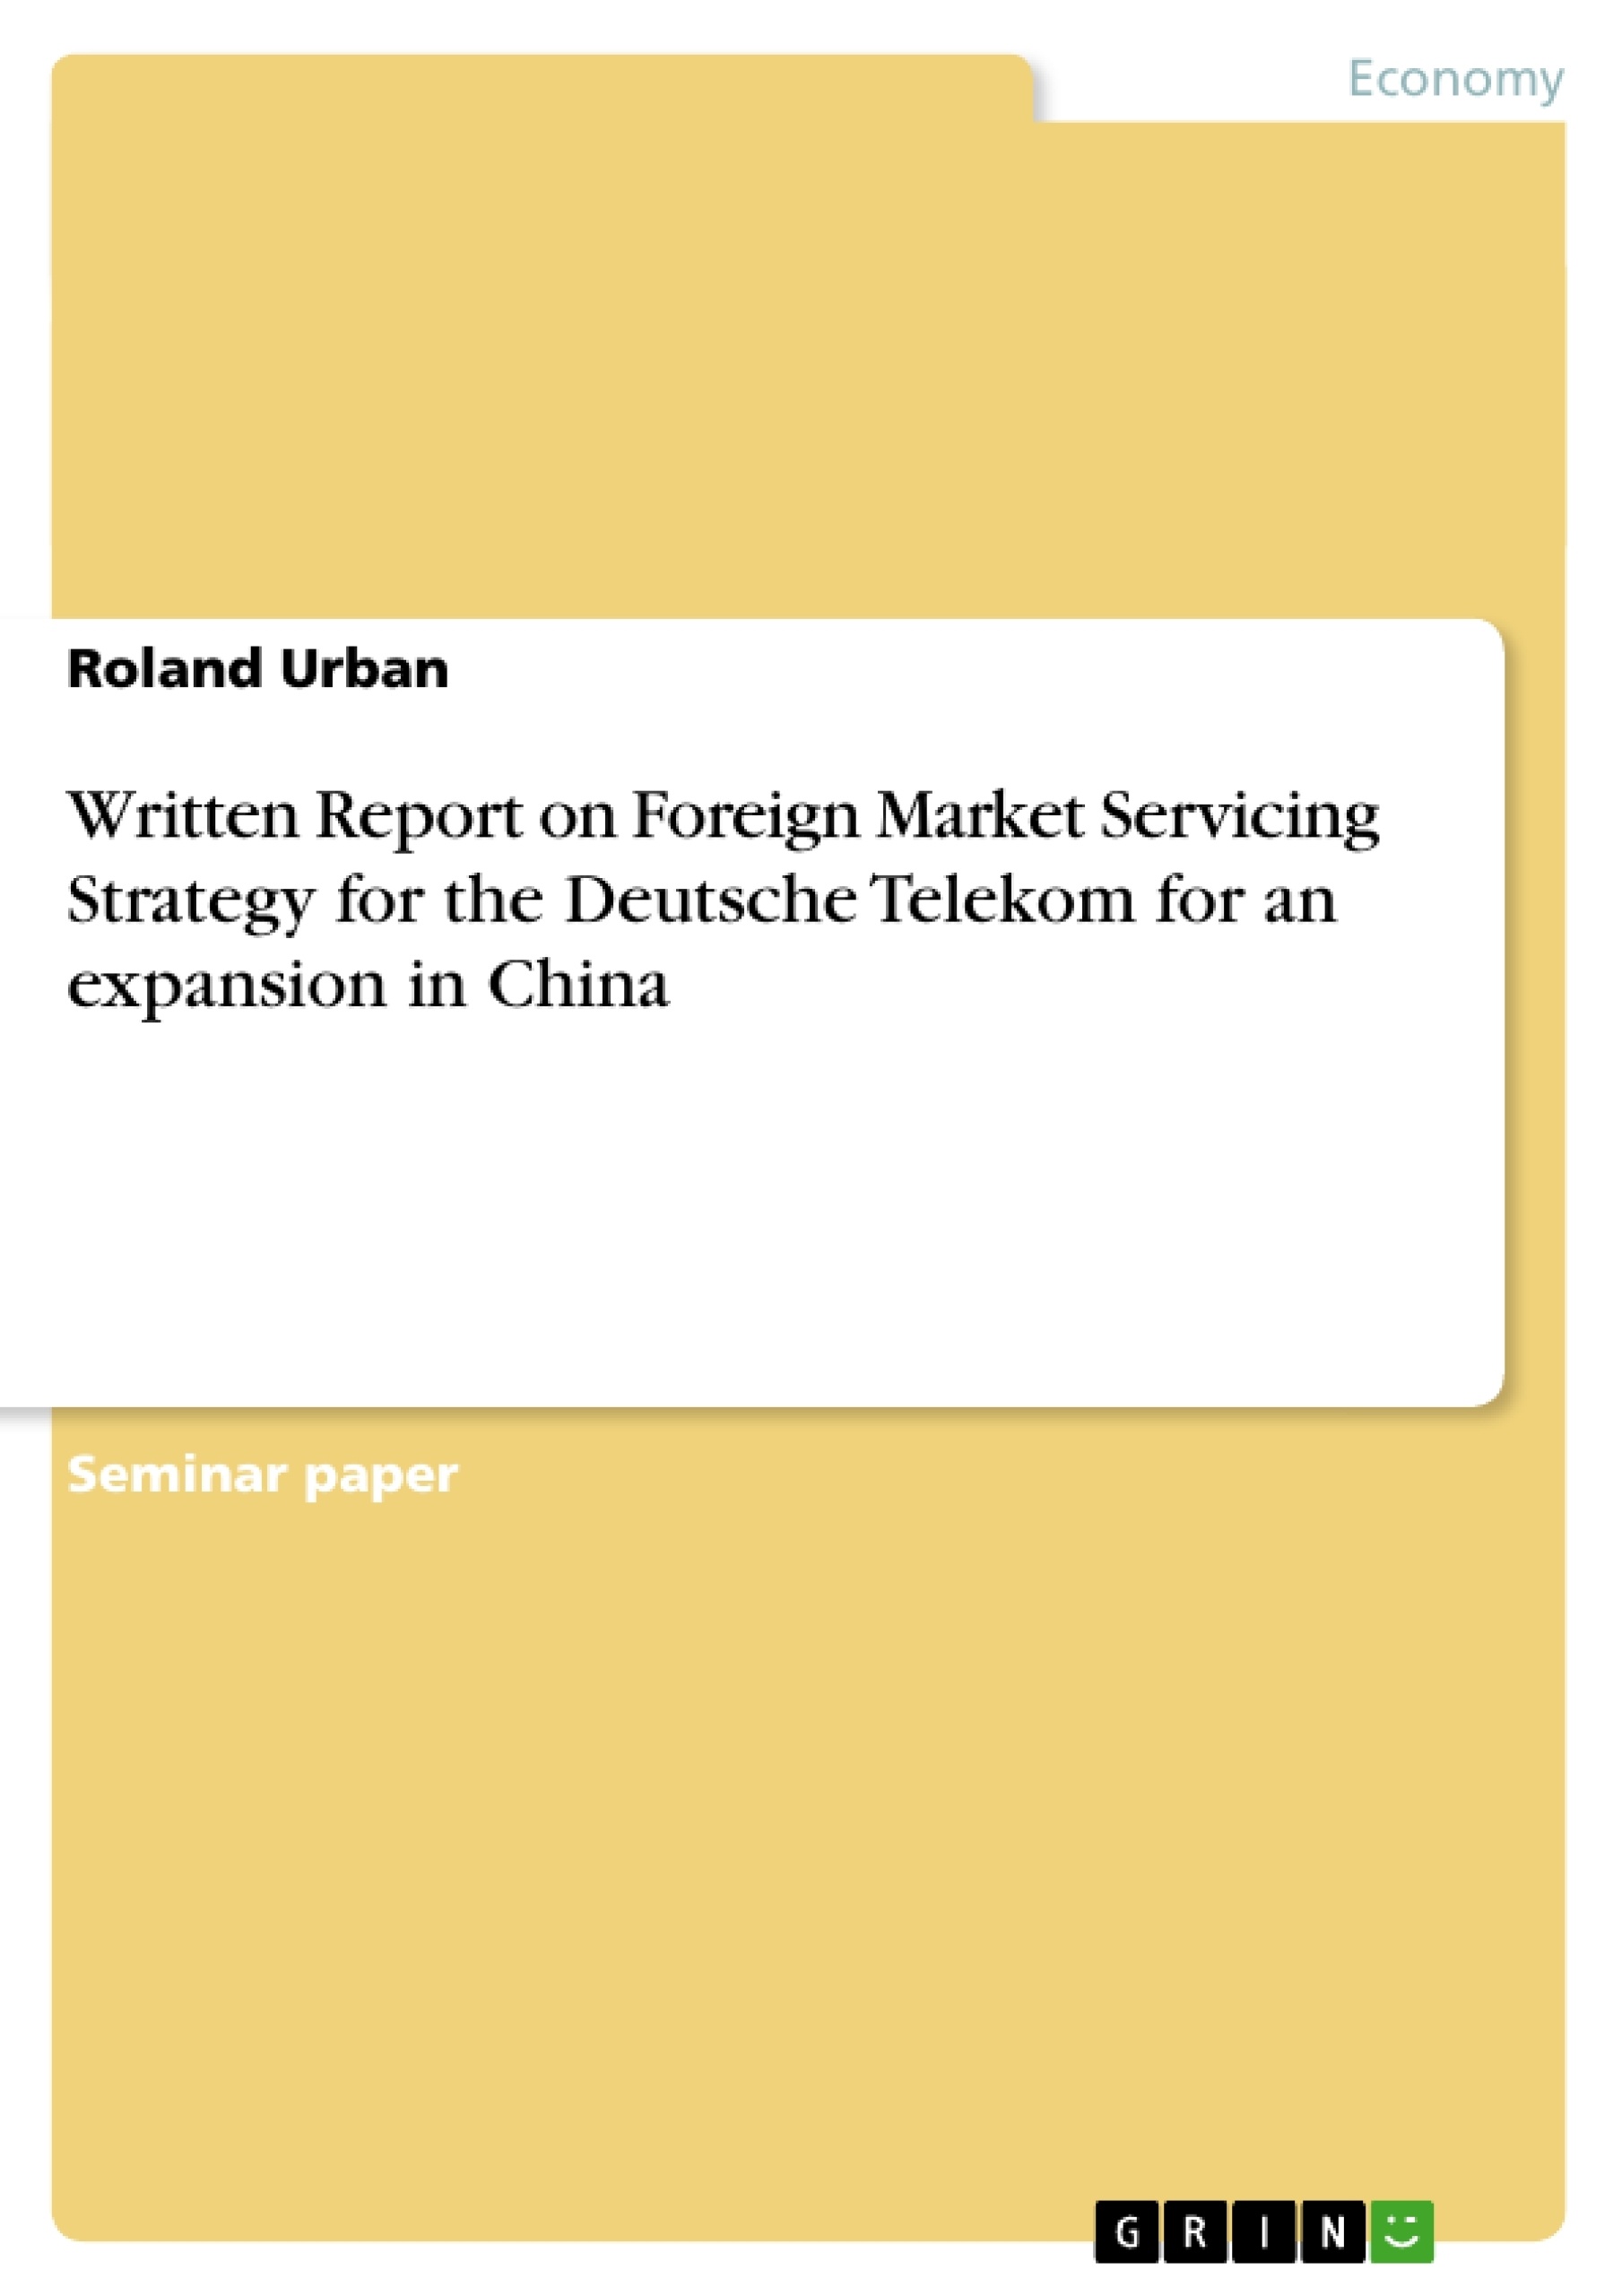 Title: Written Report on Foreign Market Servicing Strategy for the Deutsche Telekom for an expansion in China